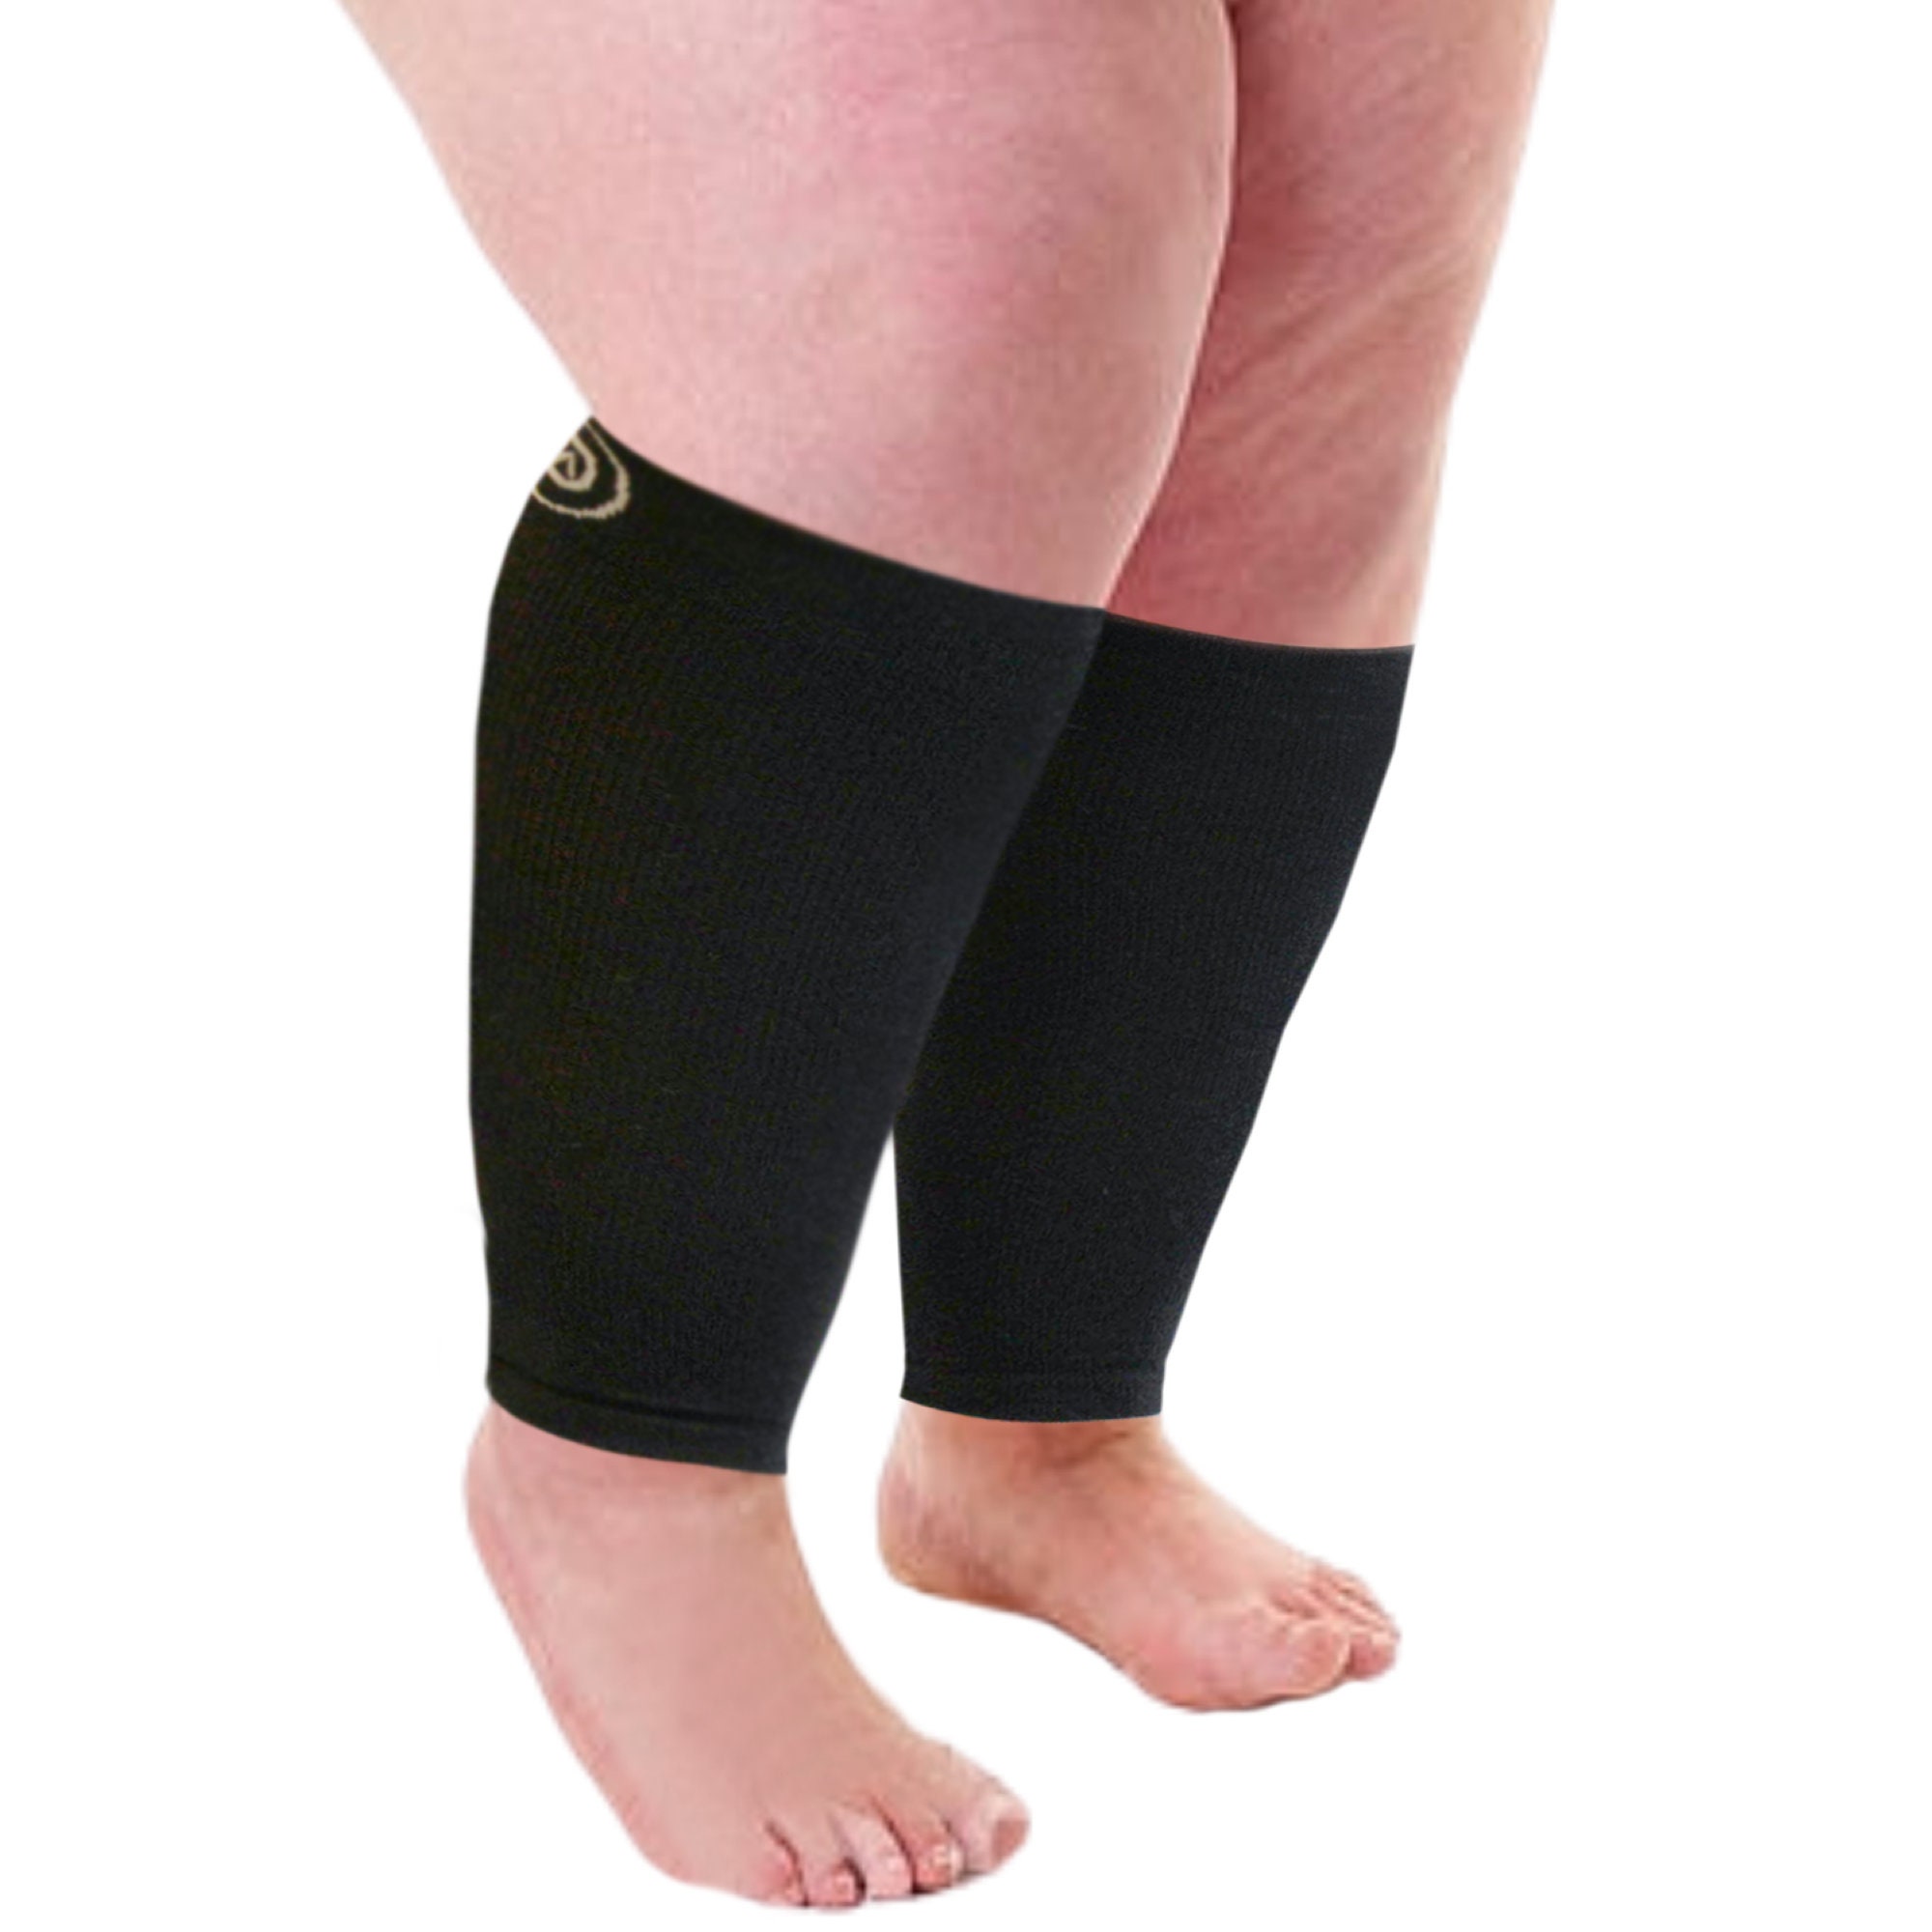 WIDE Calf Compression Sleeves Plus Size by Dominion Active 1 Pair 